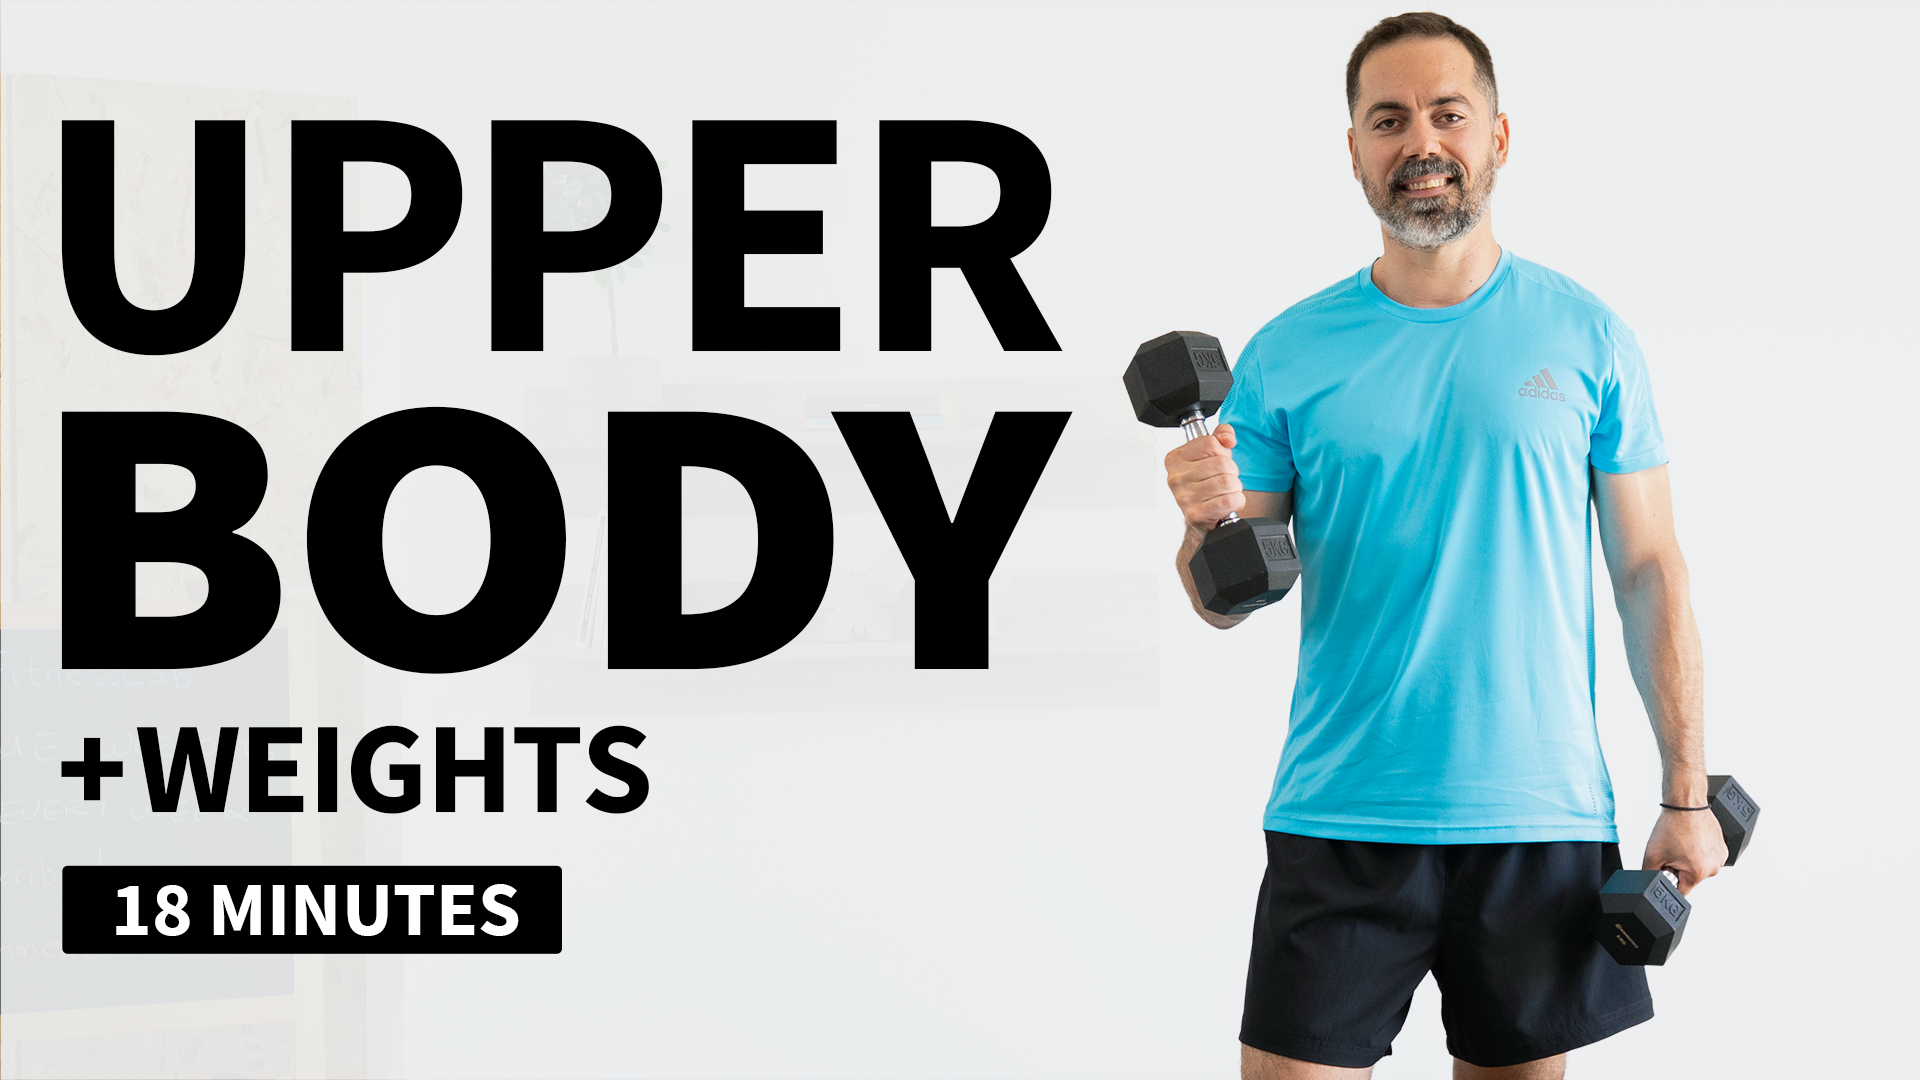 Complete UPPER BODY Workout